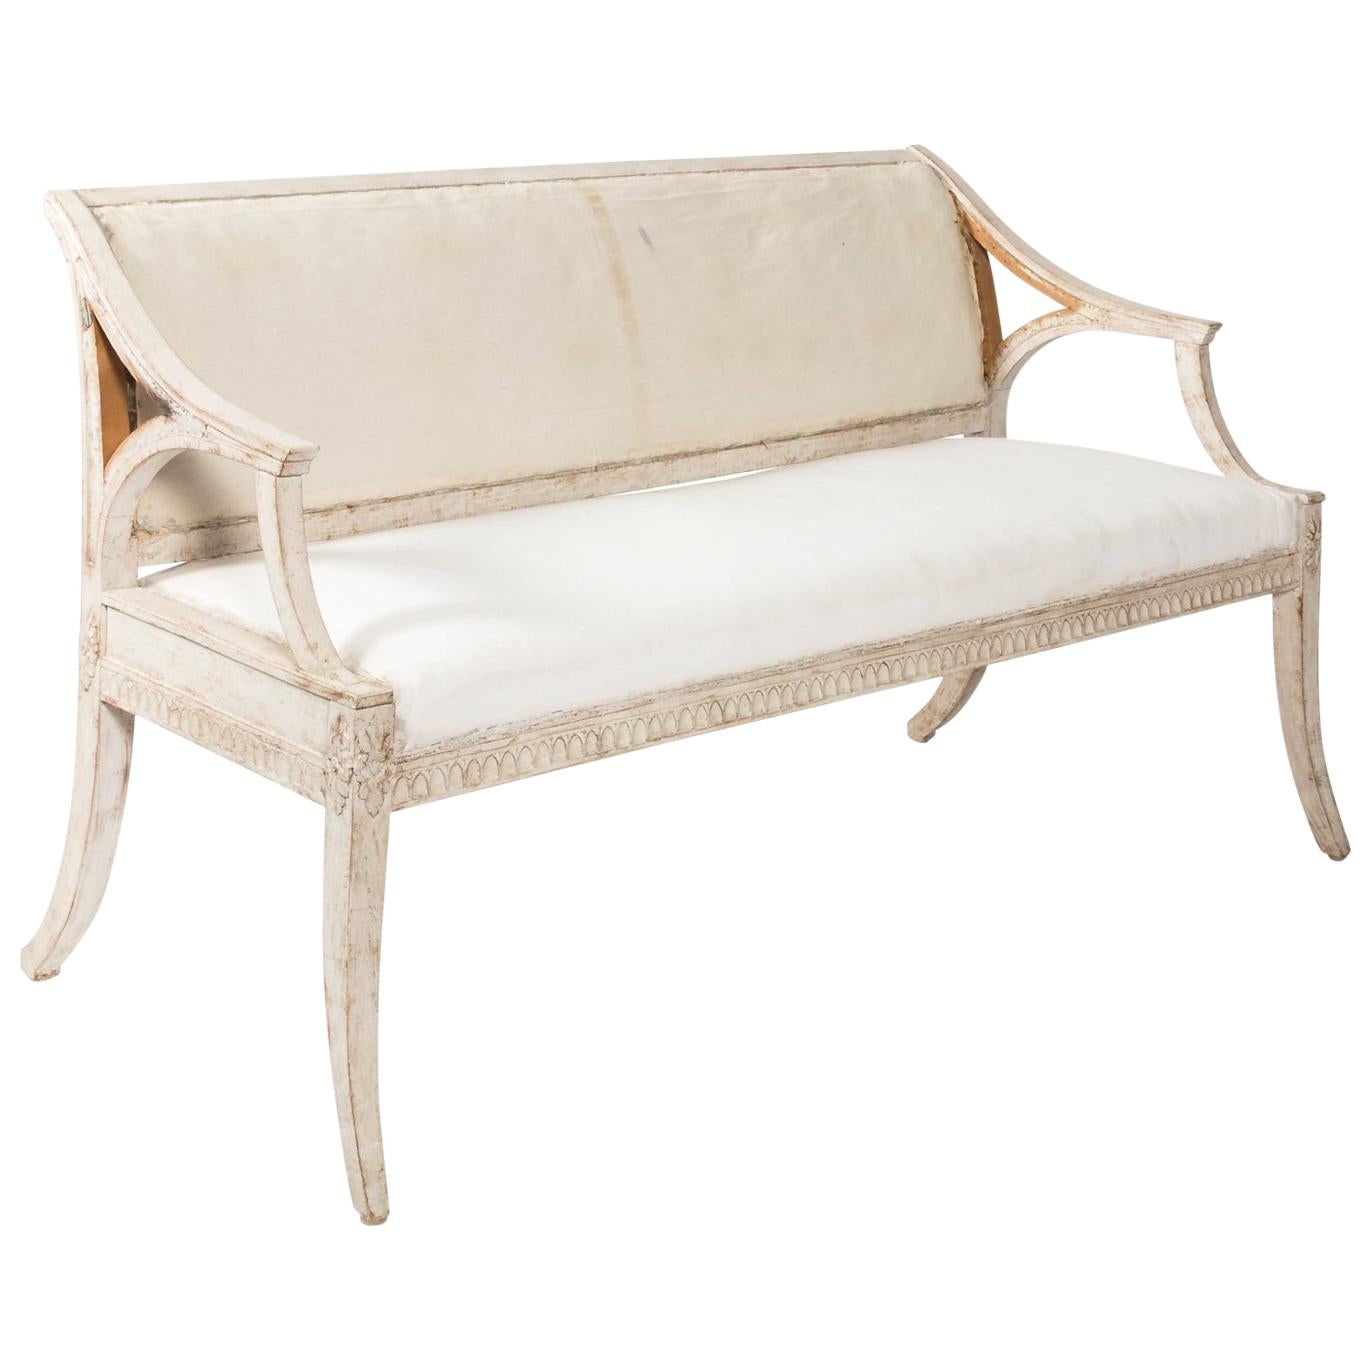 Early 20th Century Swedish White Painted Gustavian Style Settee For Sale